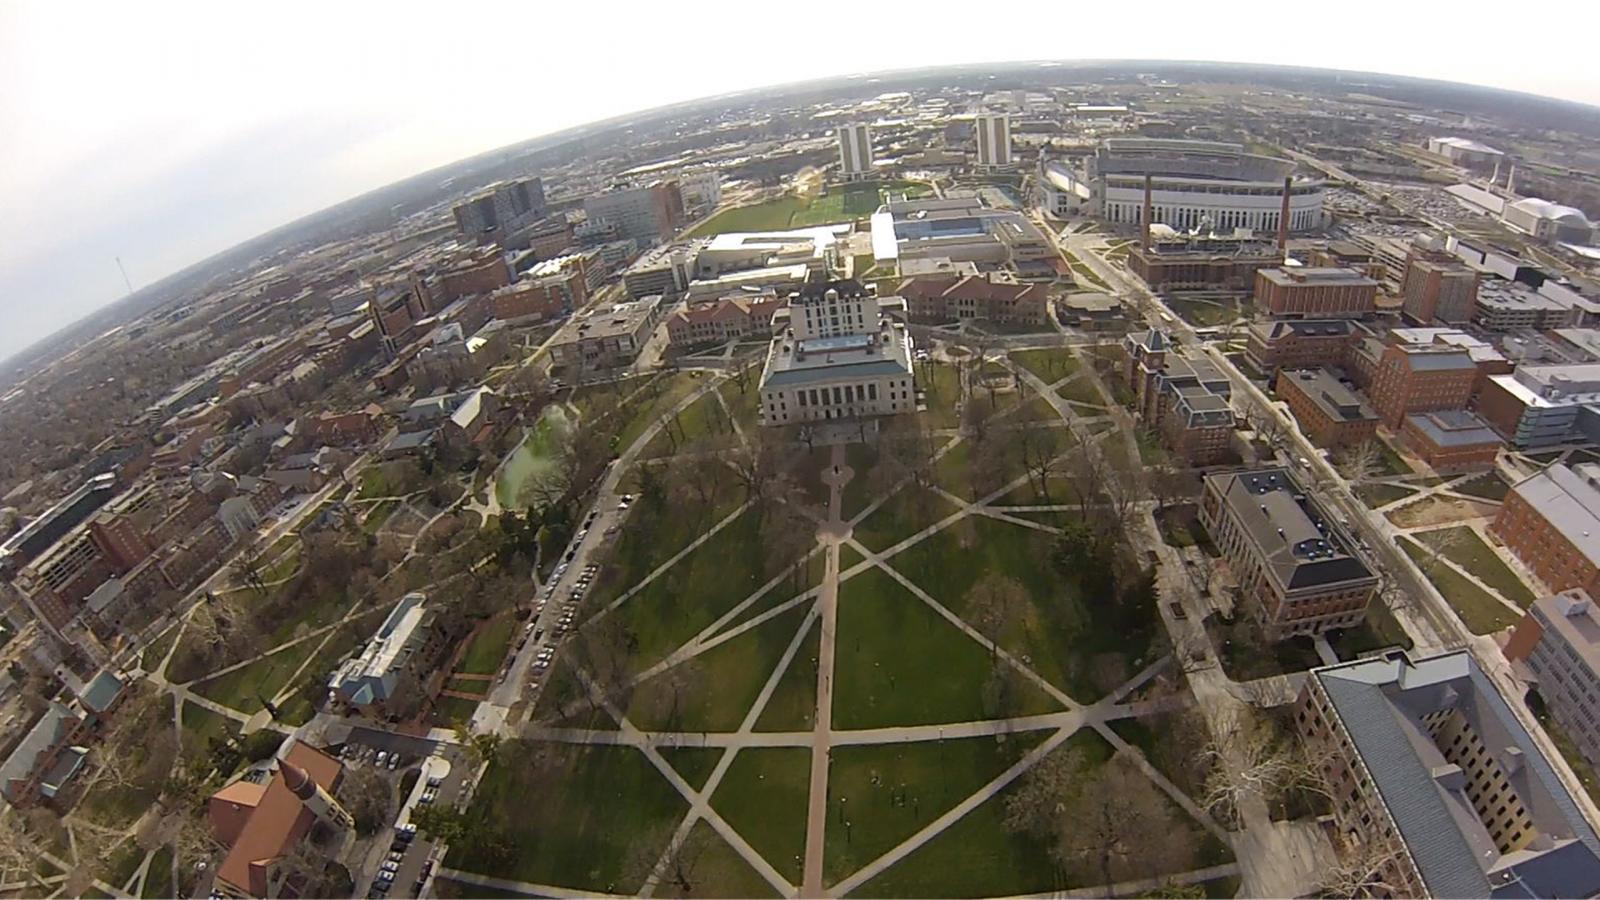 The Ohio State University Oval from above, with our Tethersonde.